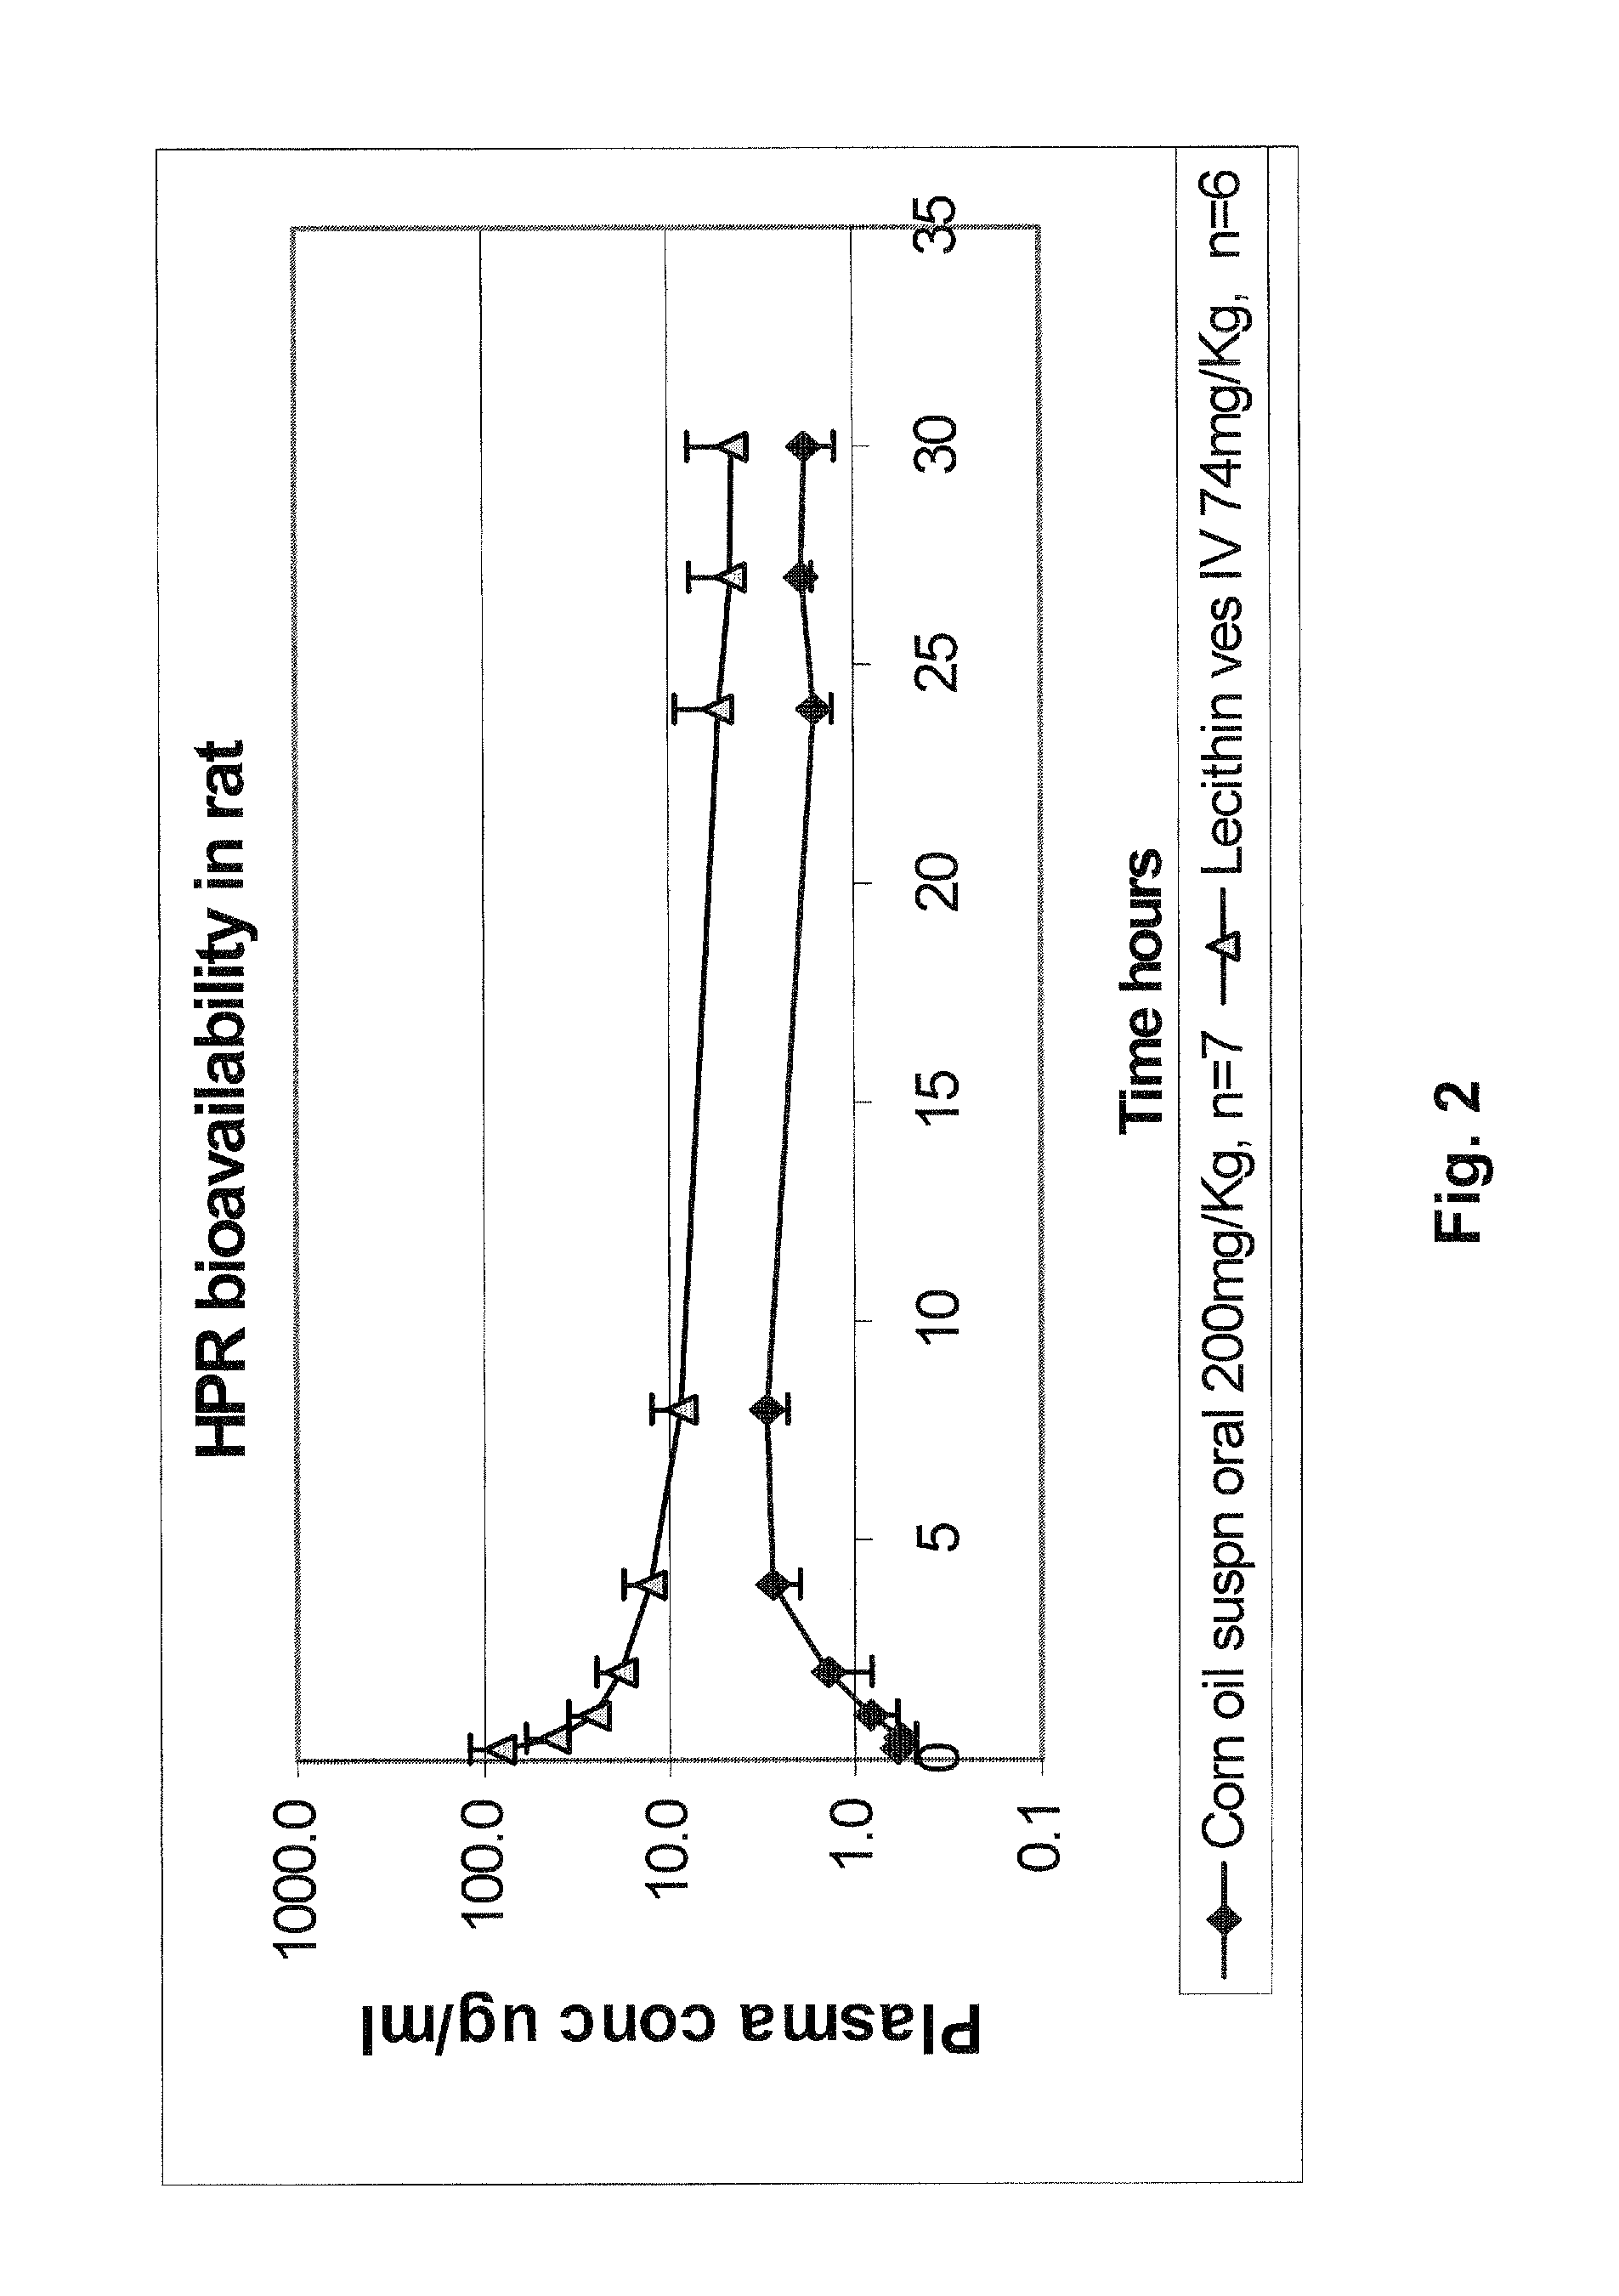 Liposomal nanoparticles and other formulations of fenretinide for use in therapy and drug delivery